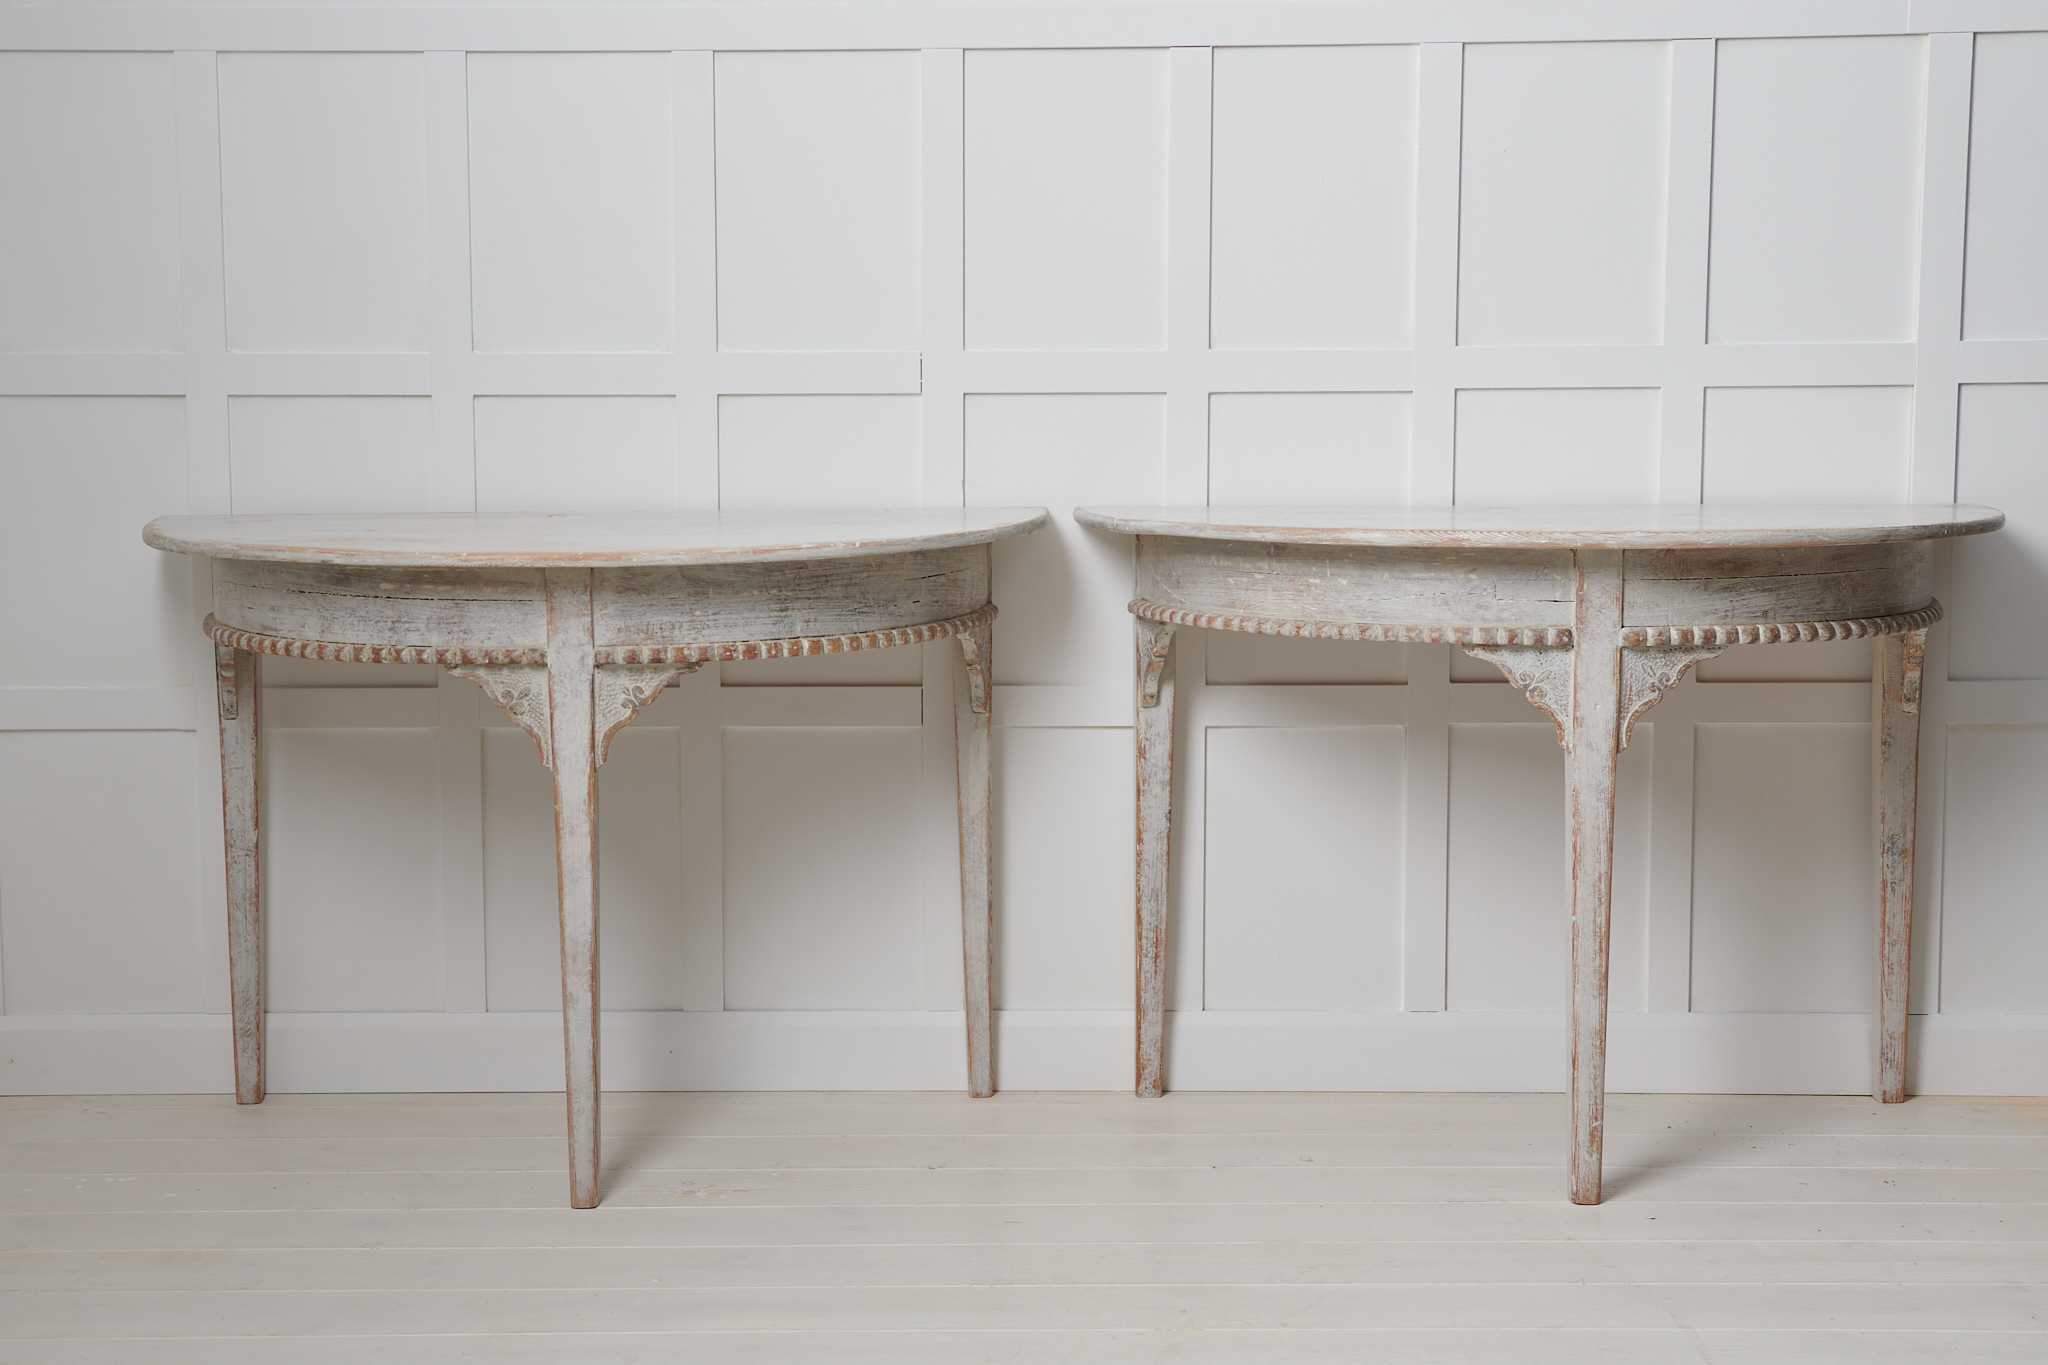 Antique demi lune table in gustavian style from Sweden. The table is a country furniture from around the 1840s and is made in two halves